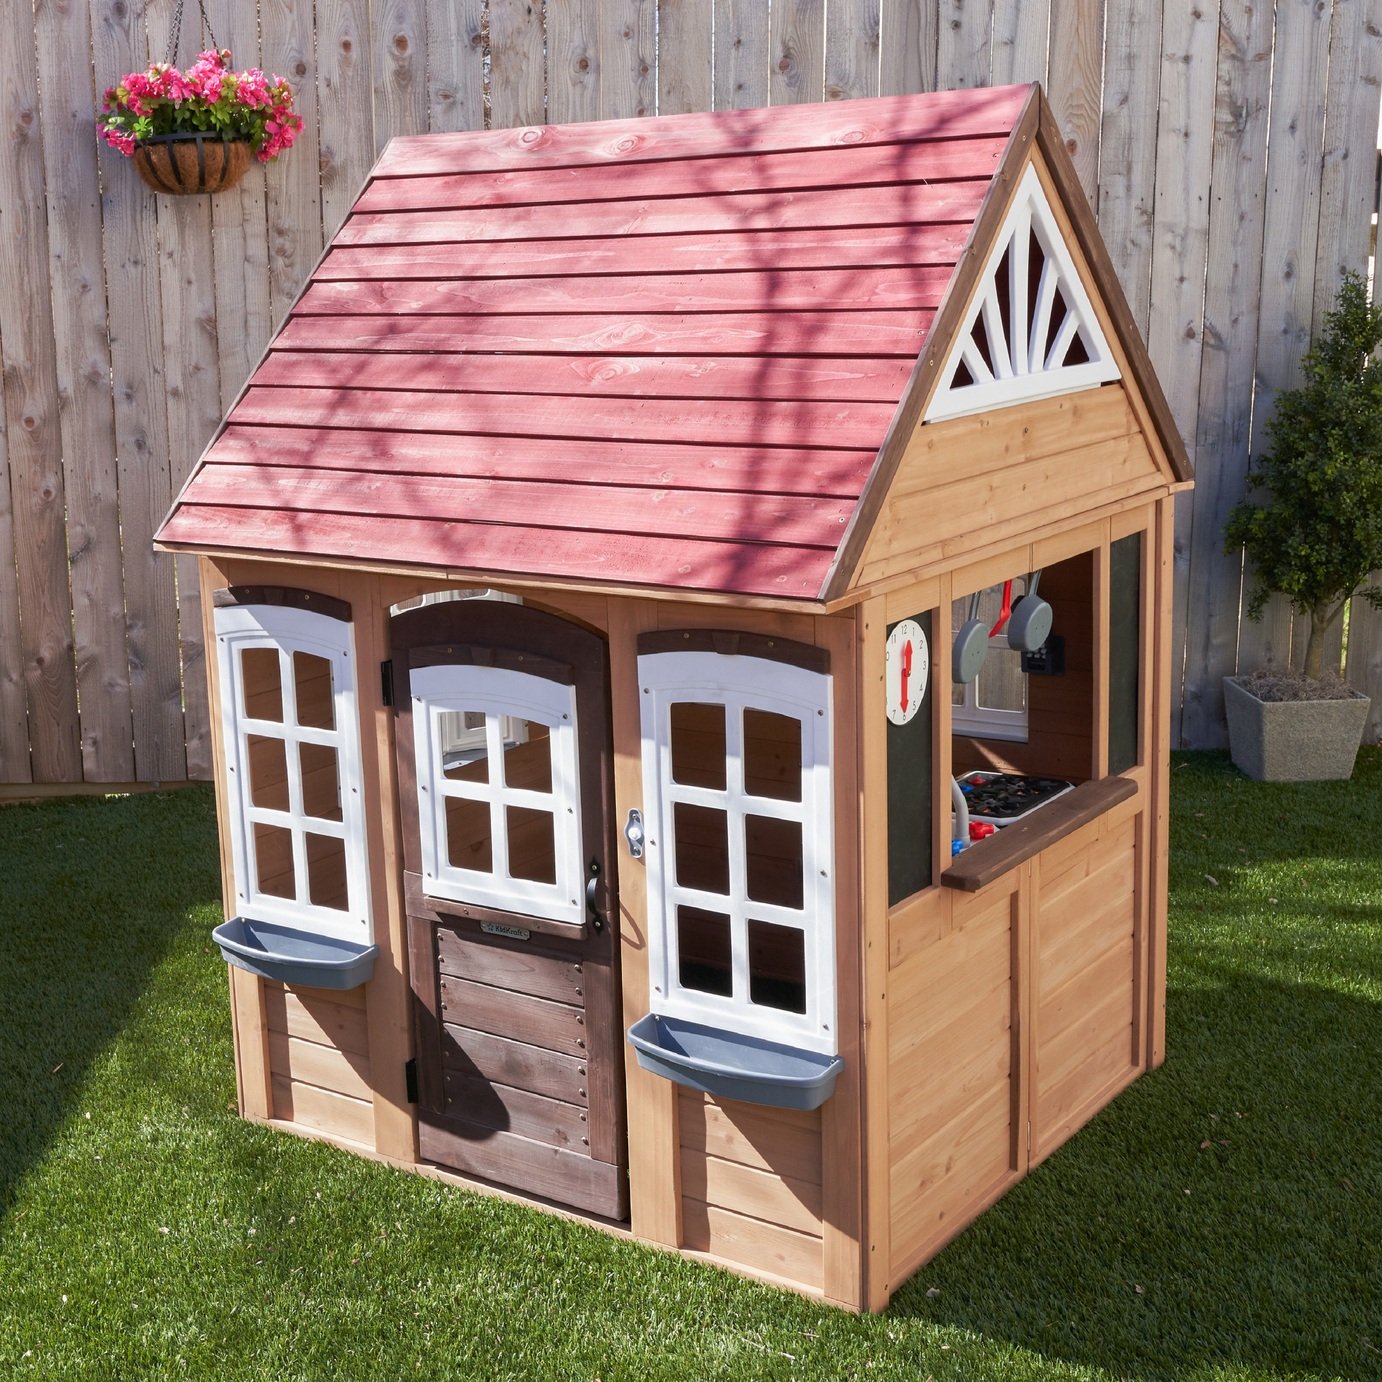 Fairmeadow Wooden Playhouse Review